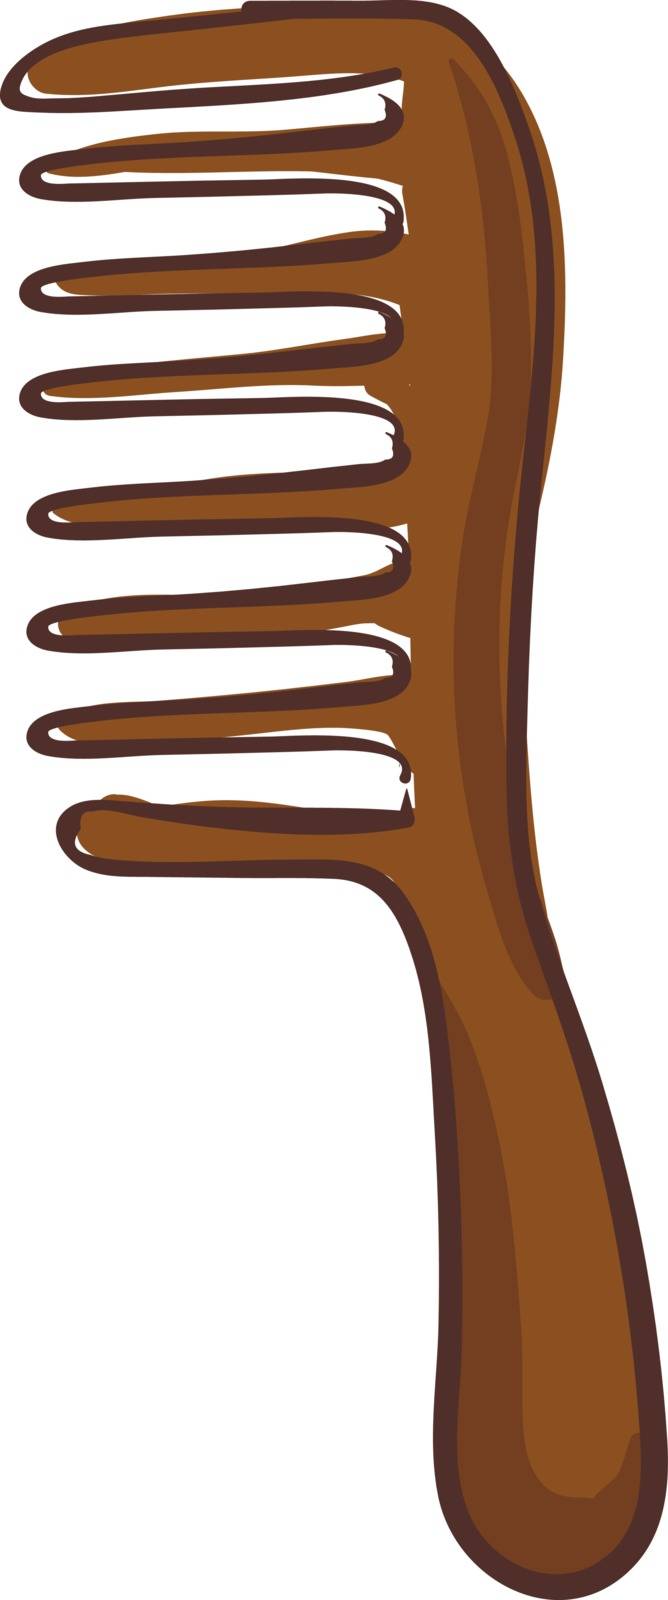 A brown comb with eight wide teeth vector color drawing or illustration